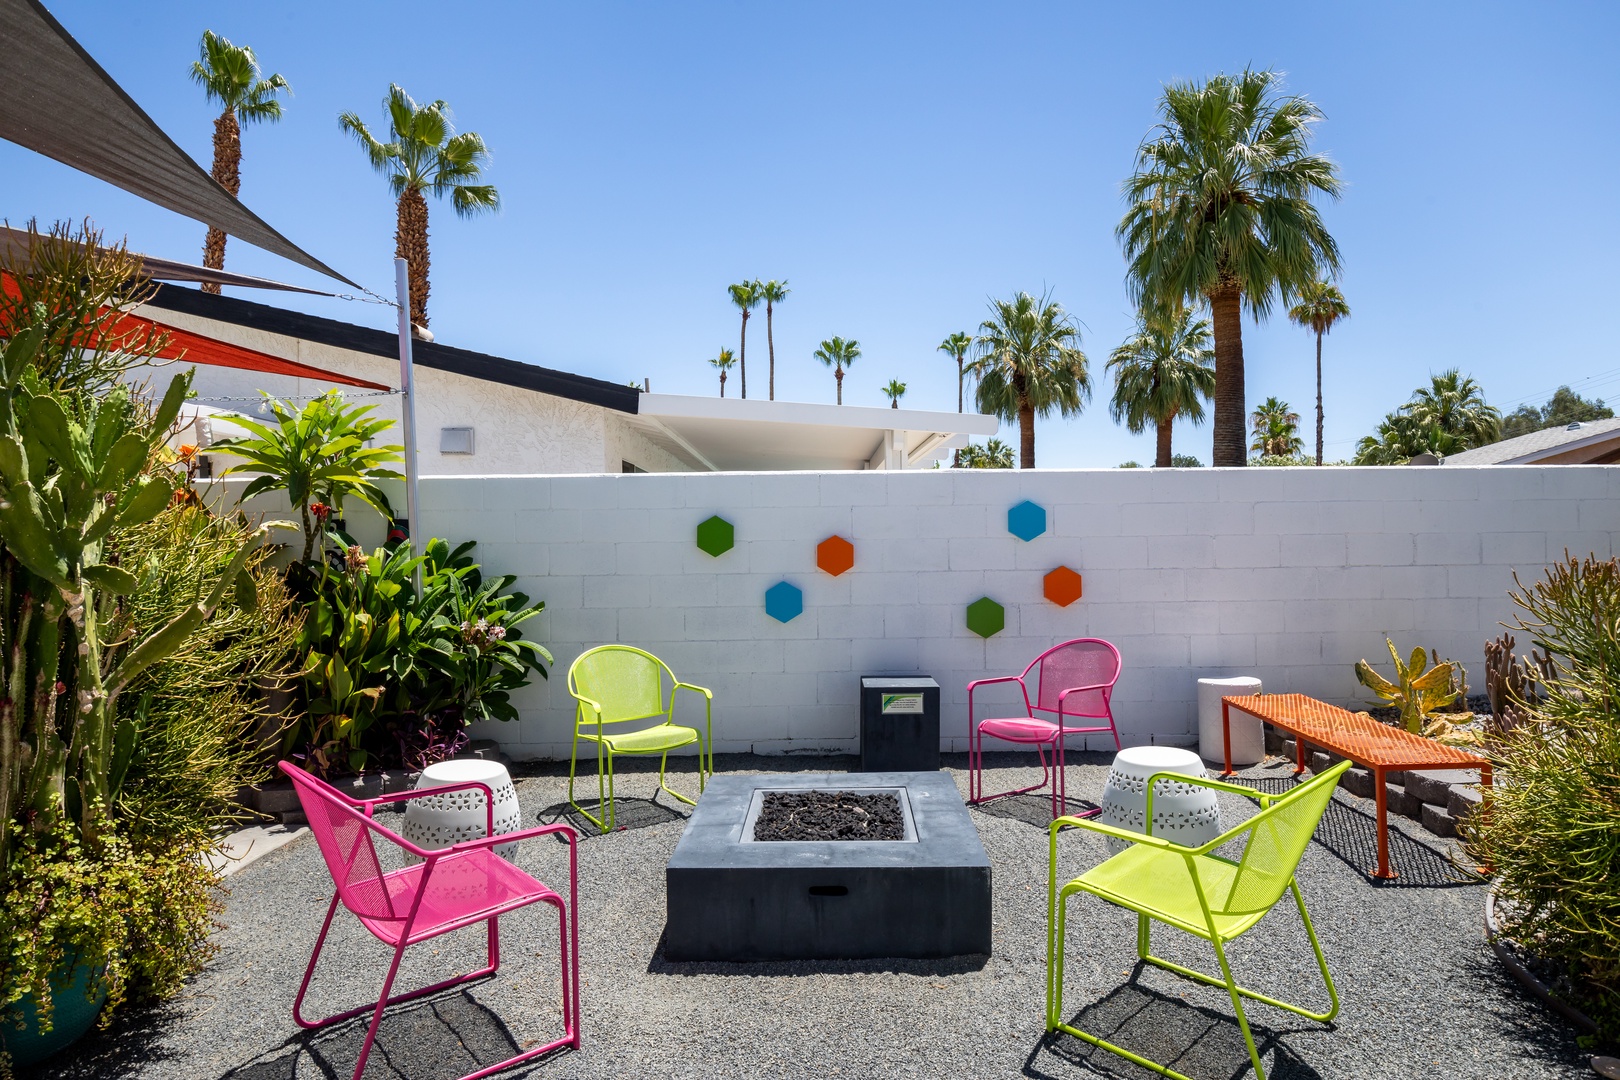 The colorful firepit is a perfect place to swap stories & make memories